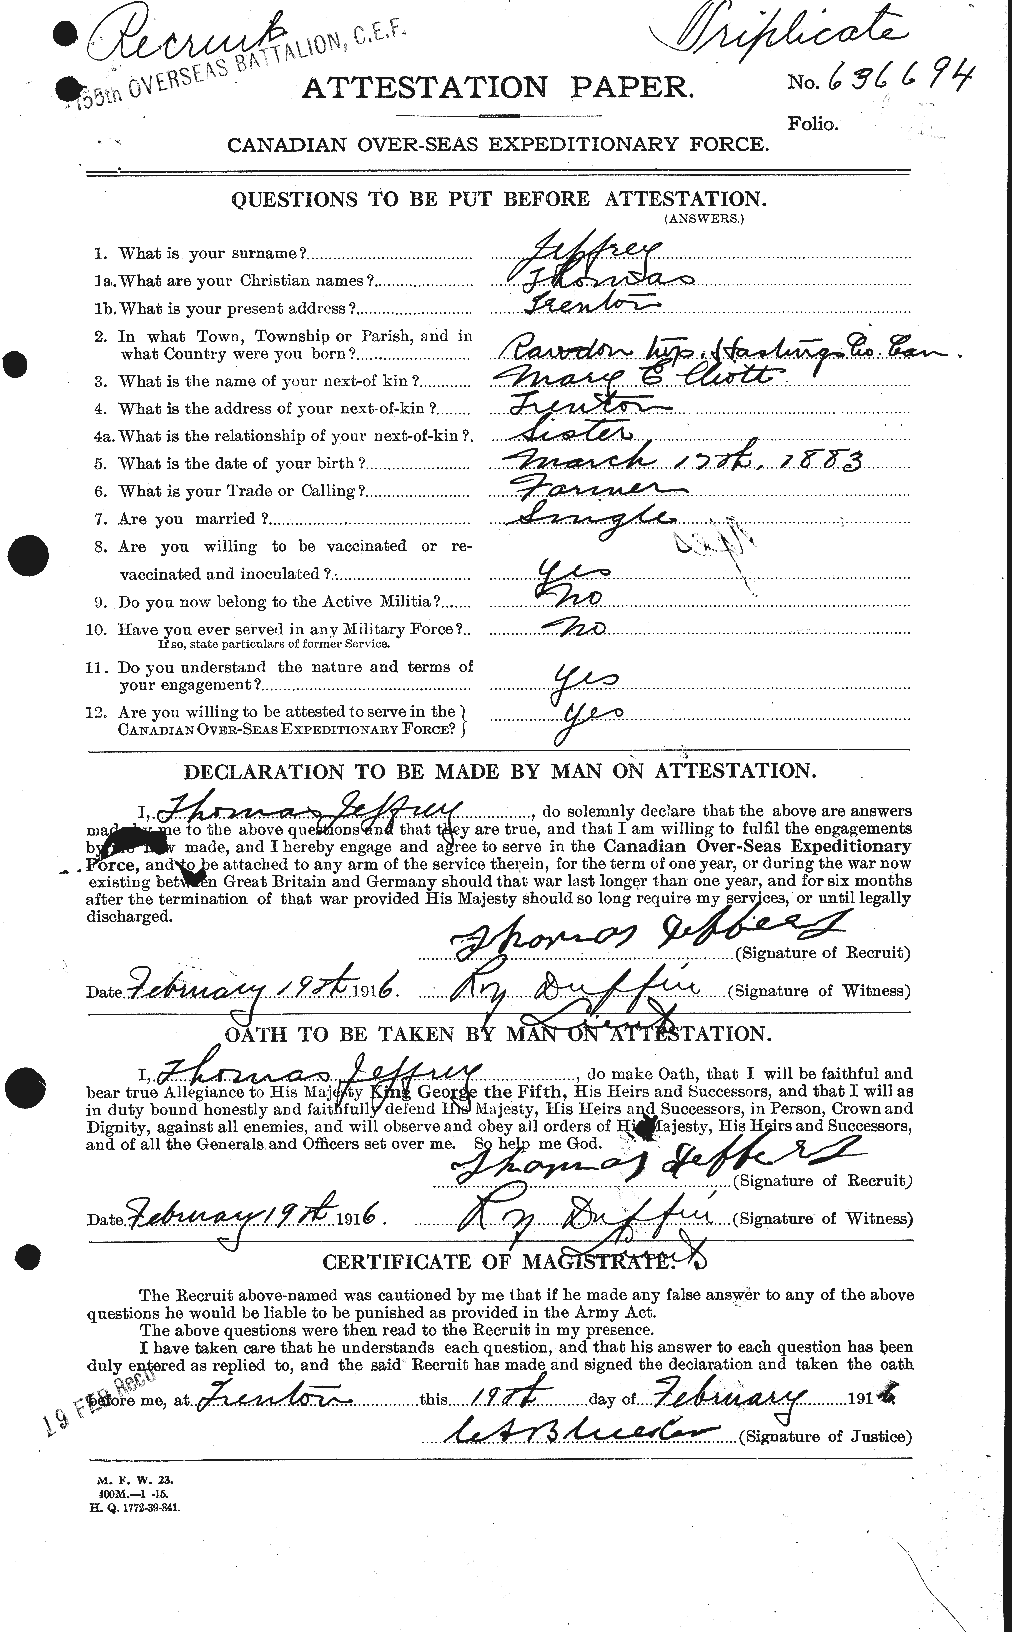 Personnel Records of the First World War - CEF 417934a